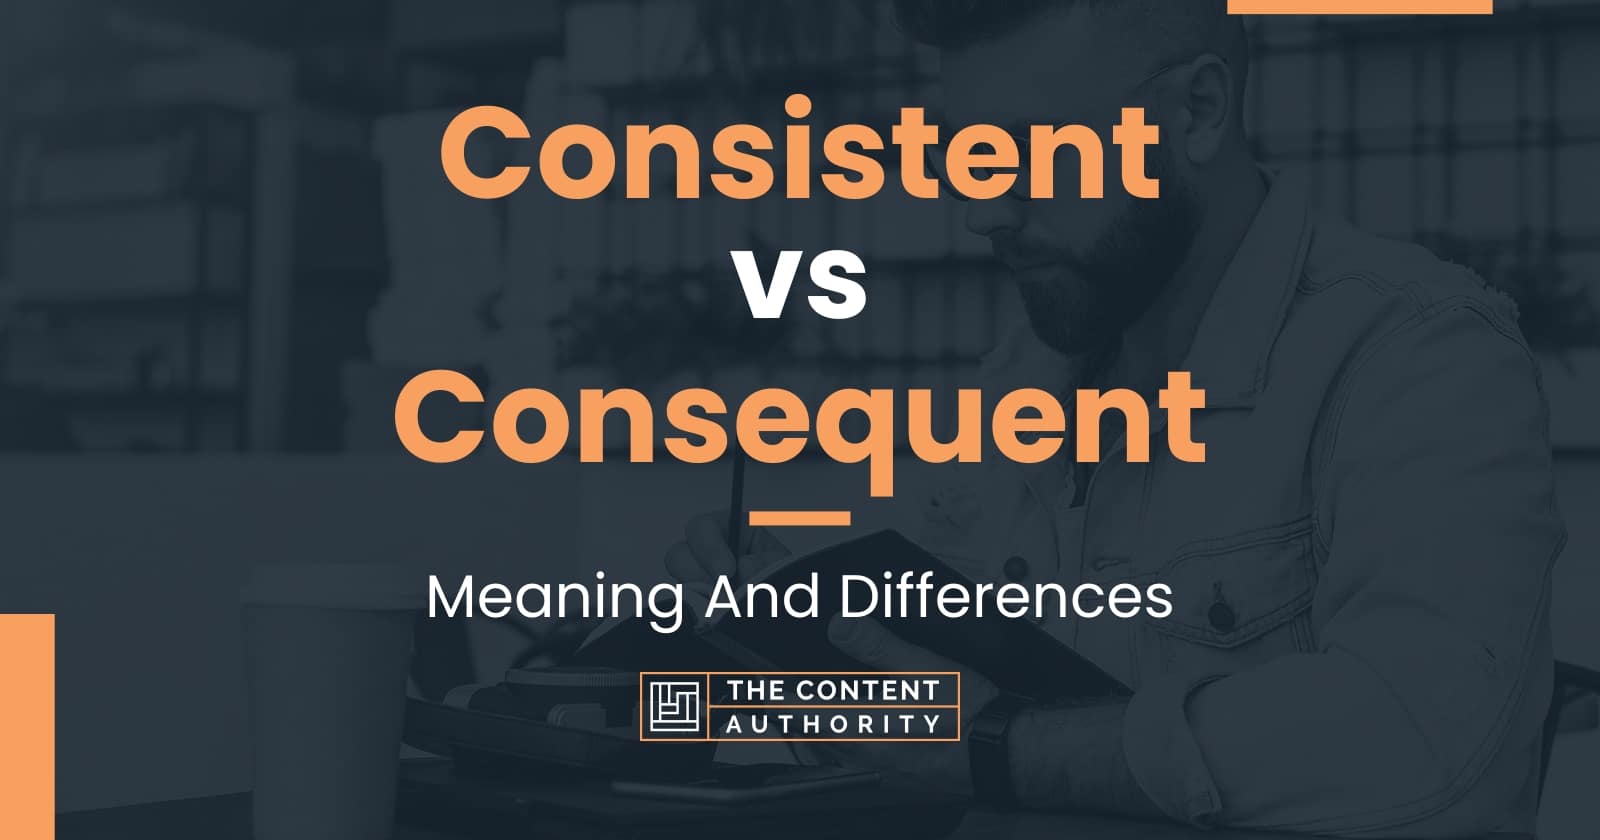 Consistent vs Consequent: Meaning And Differences